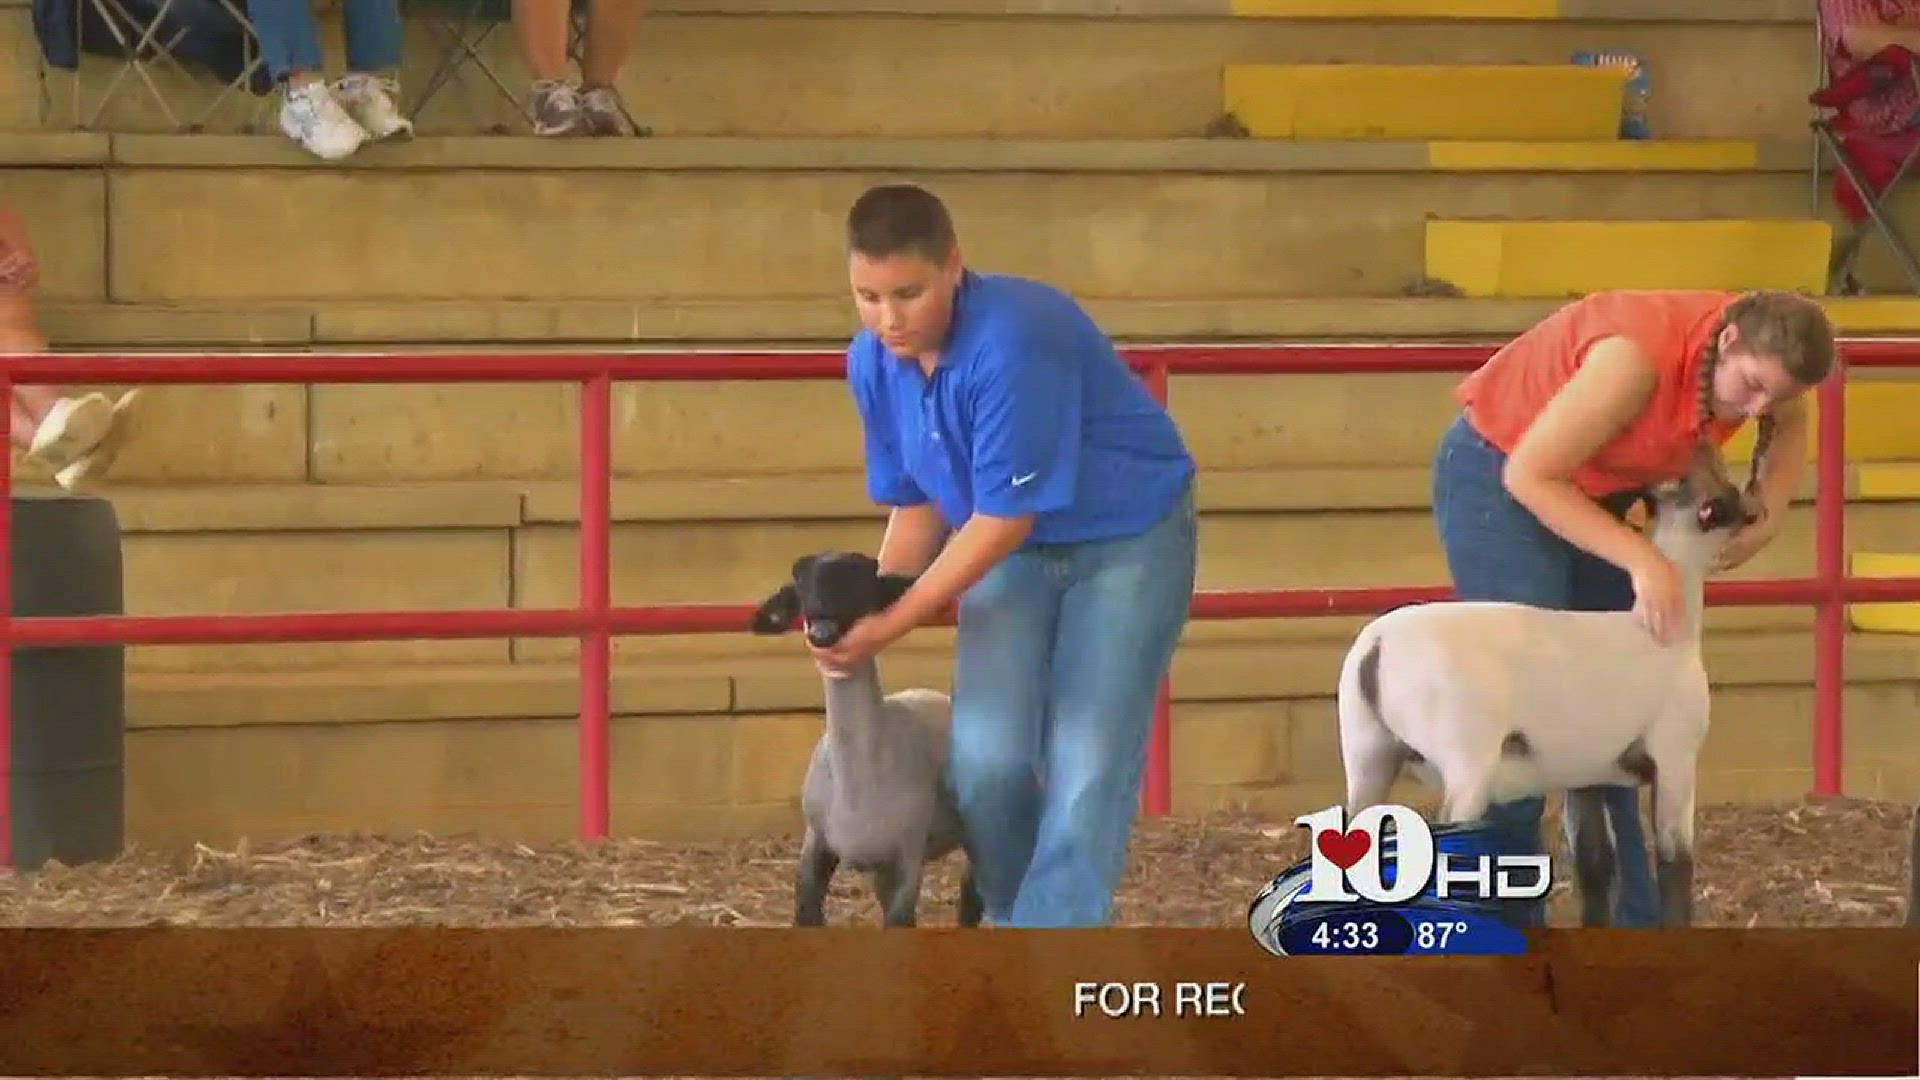 Live at Five at 4June 29, 2016A look at the 4-H Sheep expo at Chilhowee Park in Knoxville.